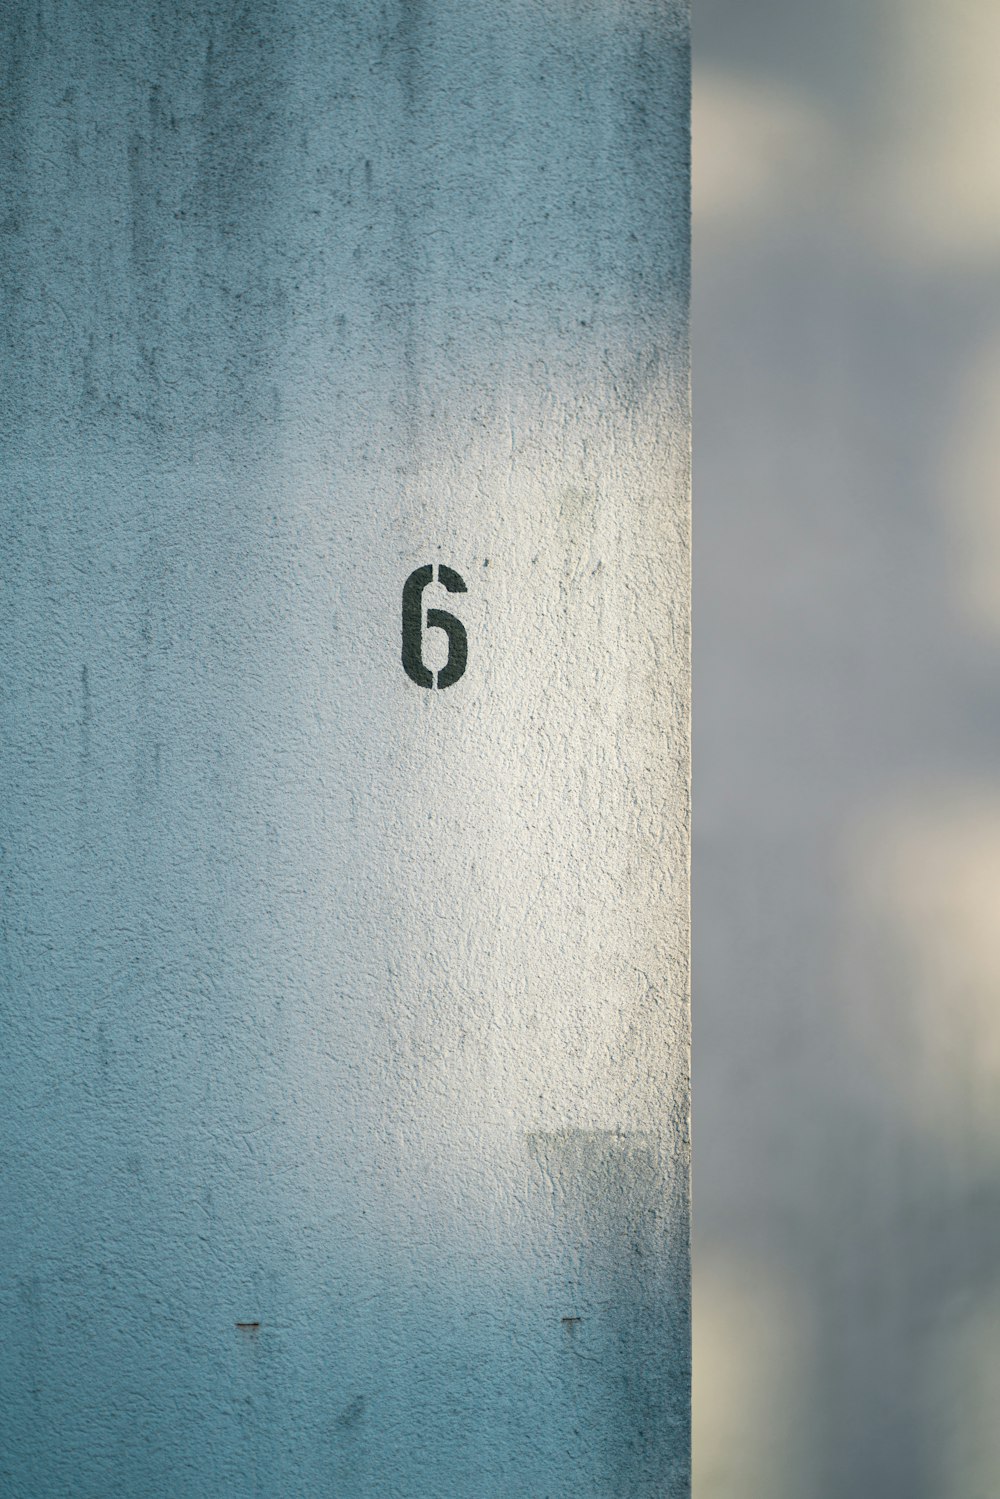 a close up of a wall with a number on it